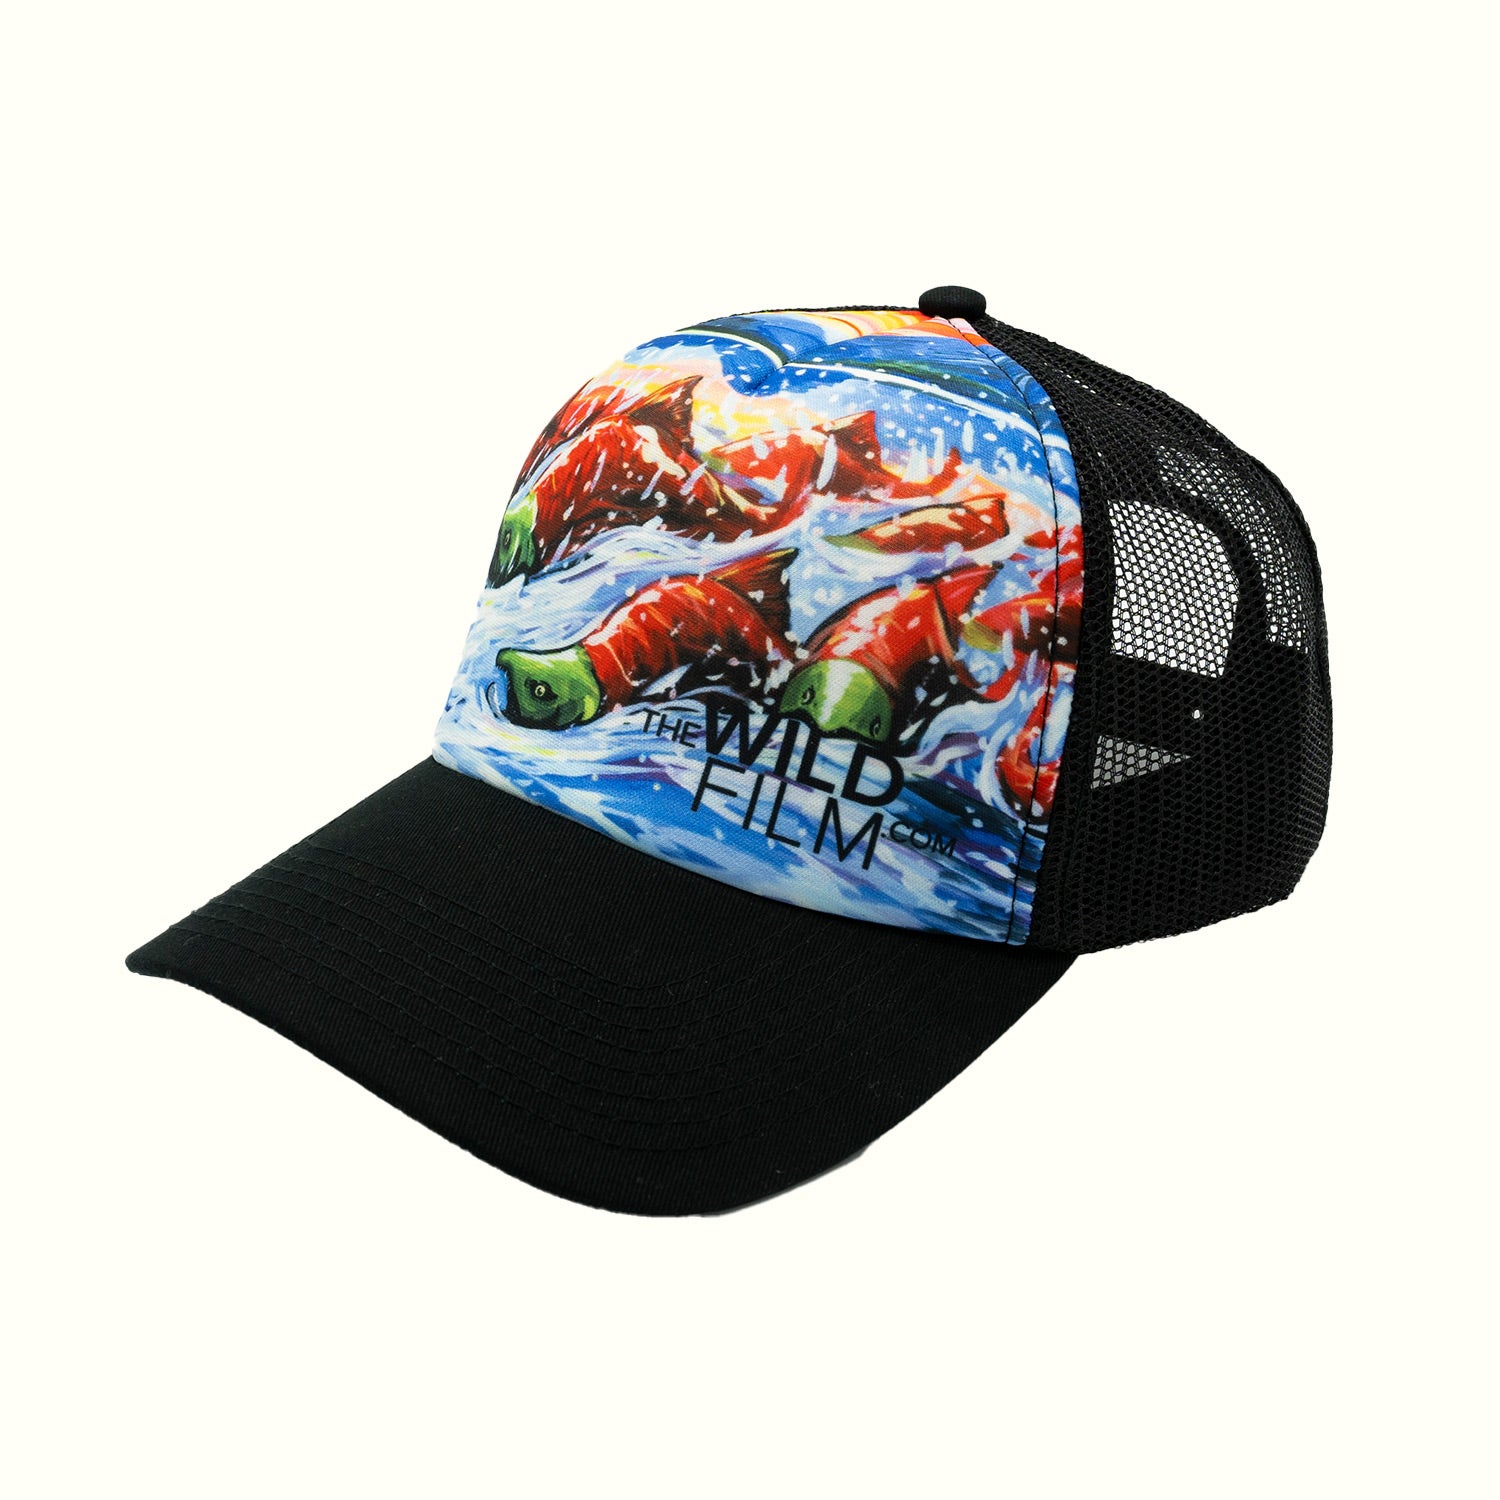 close up image of The Wild image hat